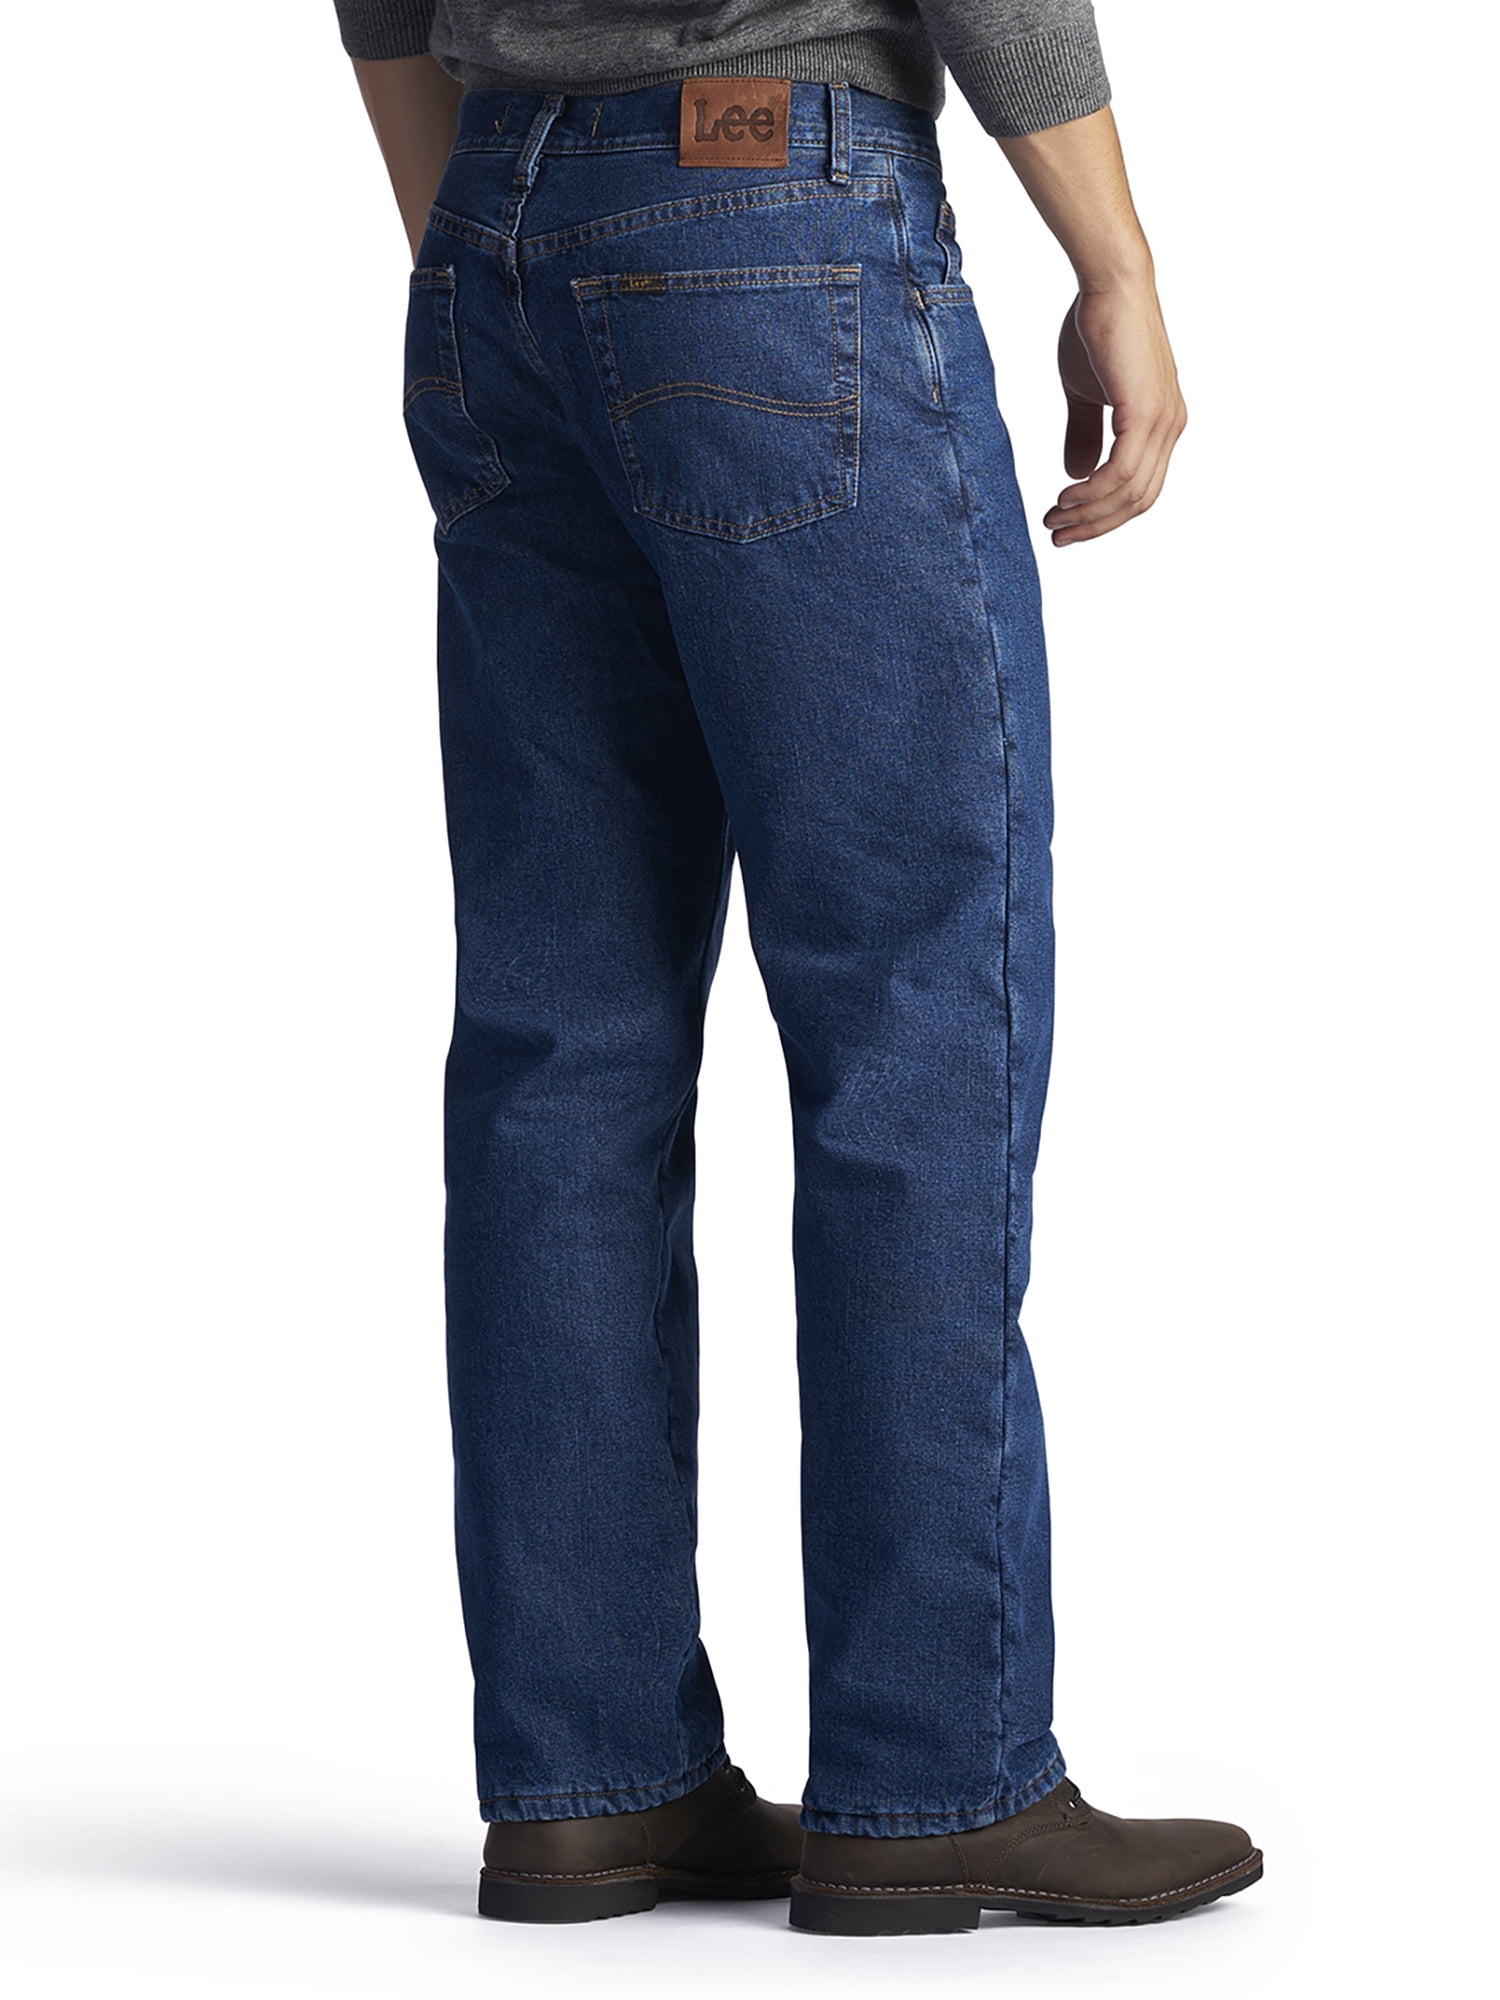 lee lined jeans